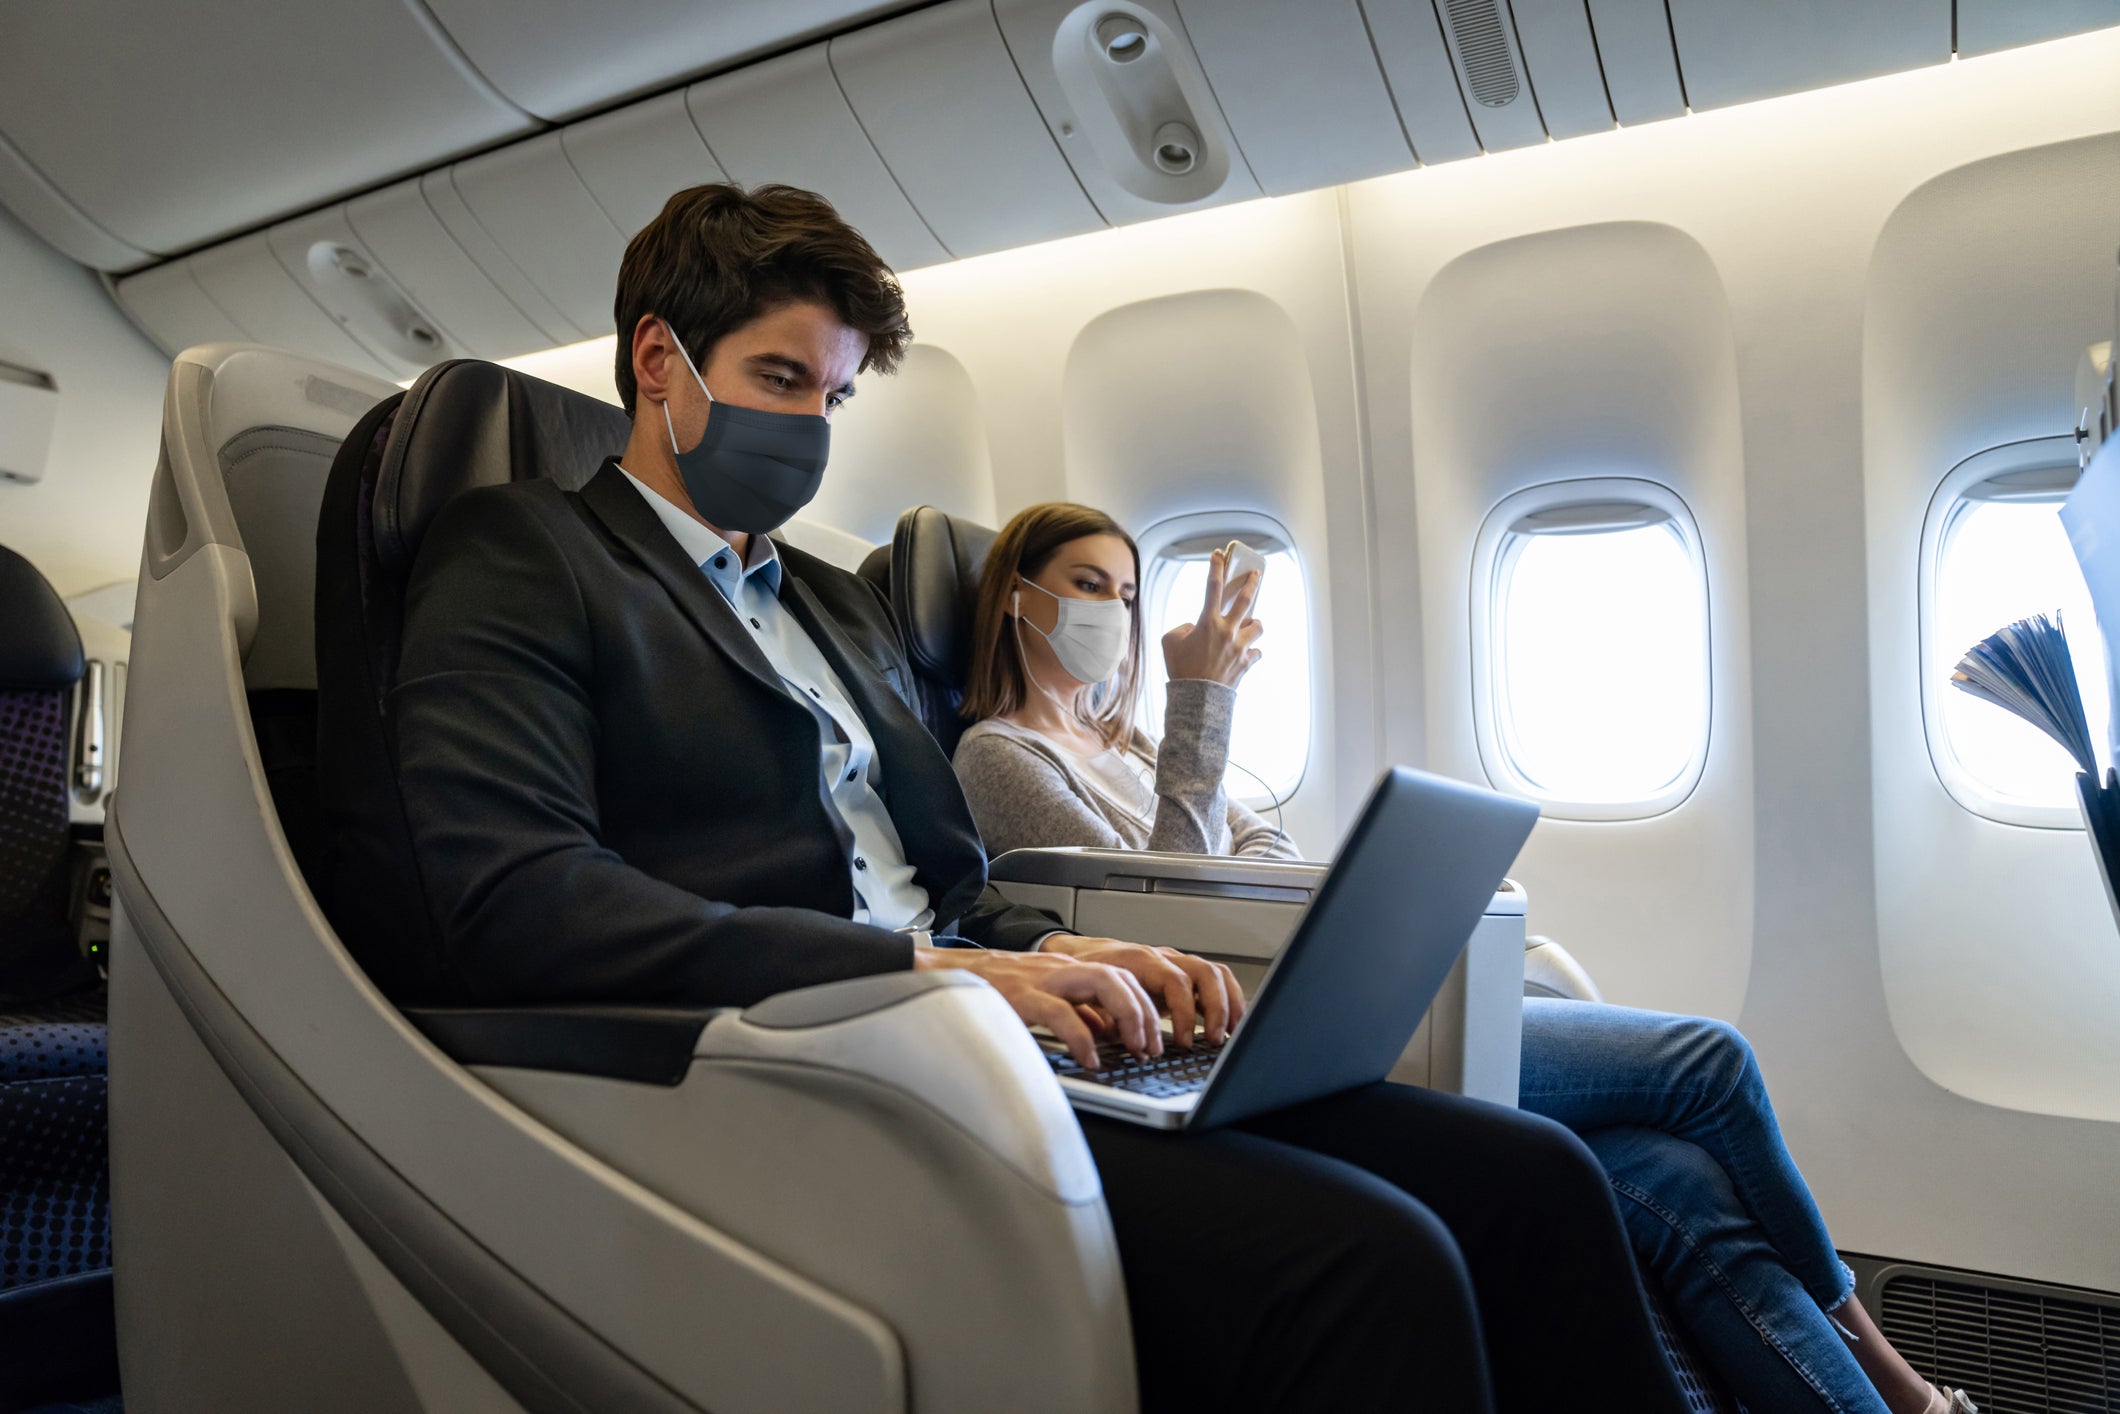 People traveling by air in business class and wearing facemasks on the plane - COVID-19 pandemic lifestyle concepts